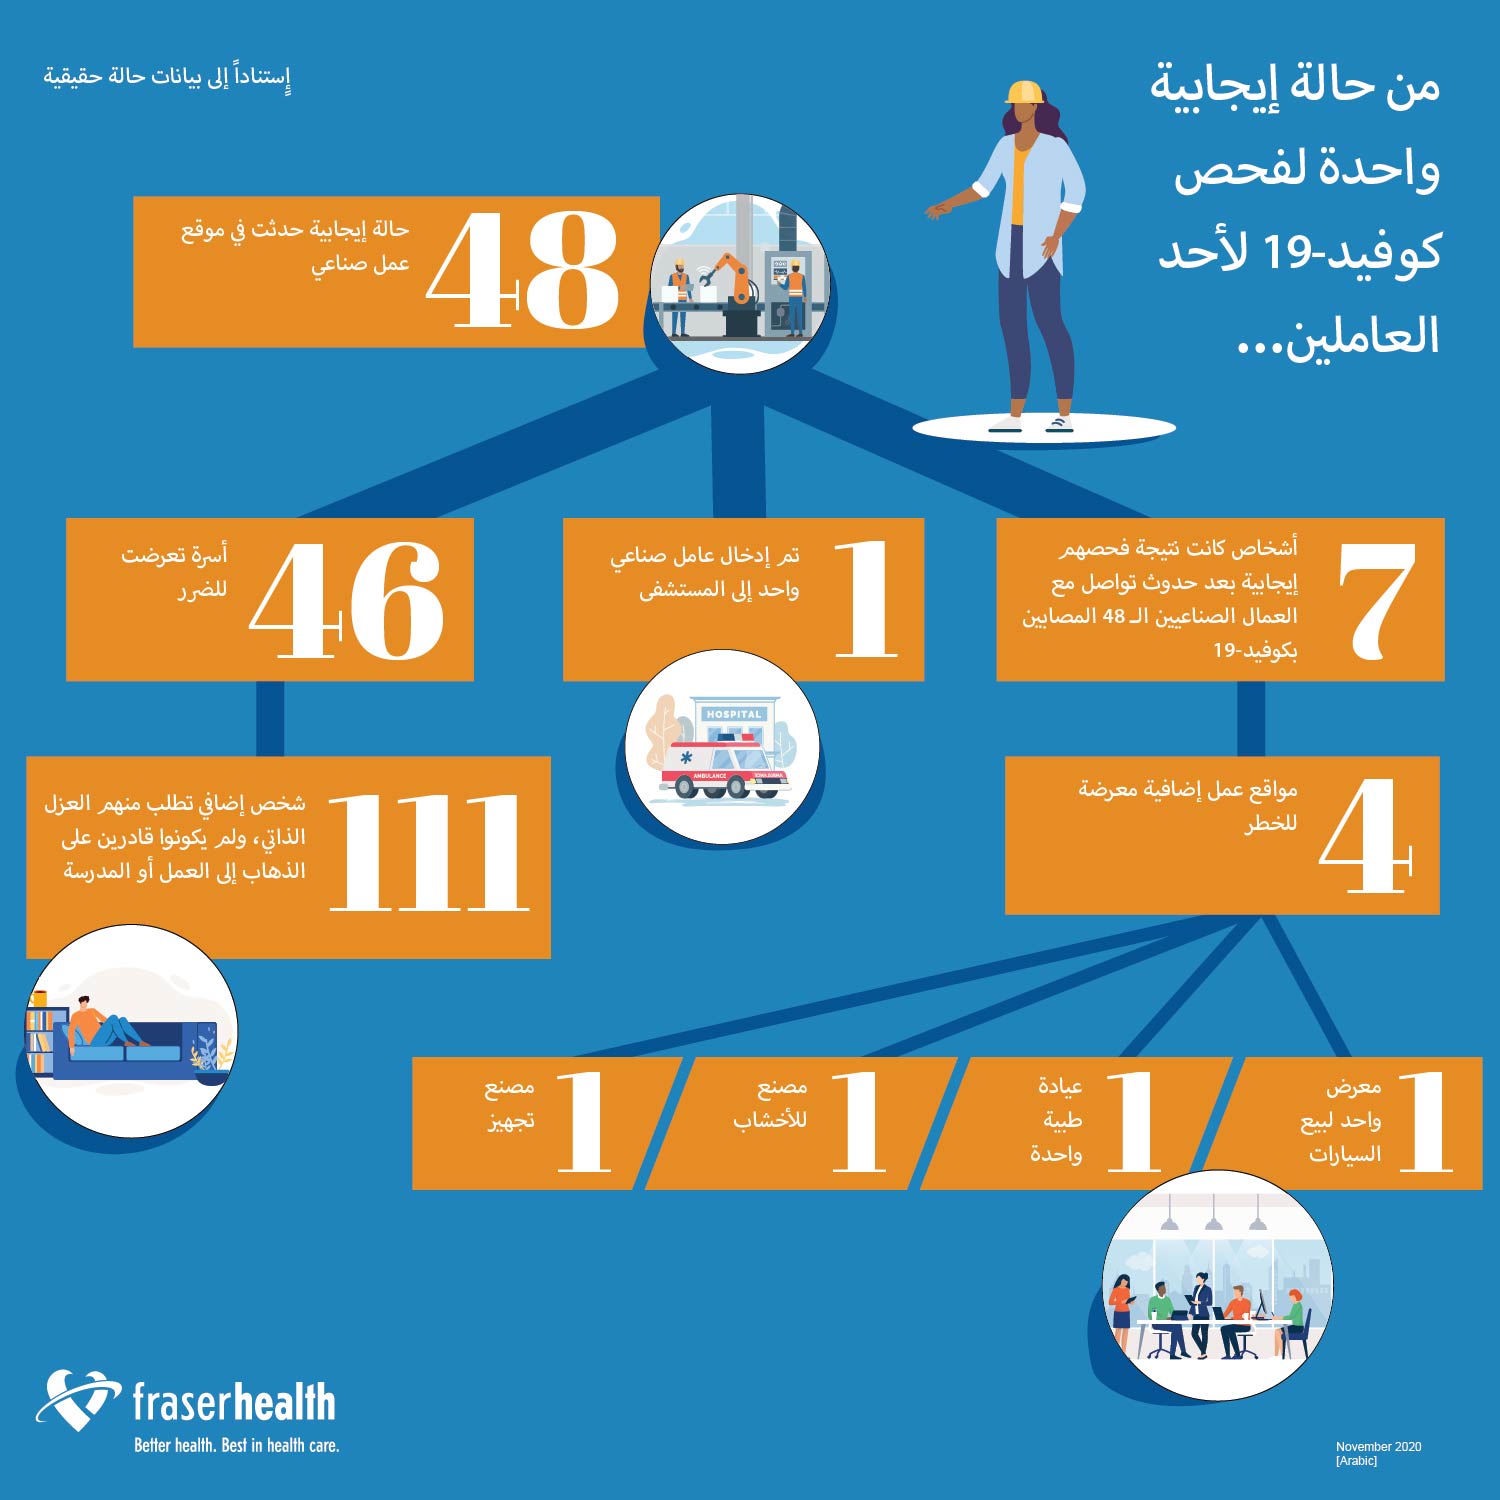 Worksite infographic in Arabic